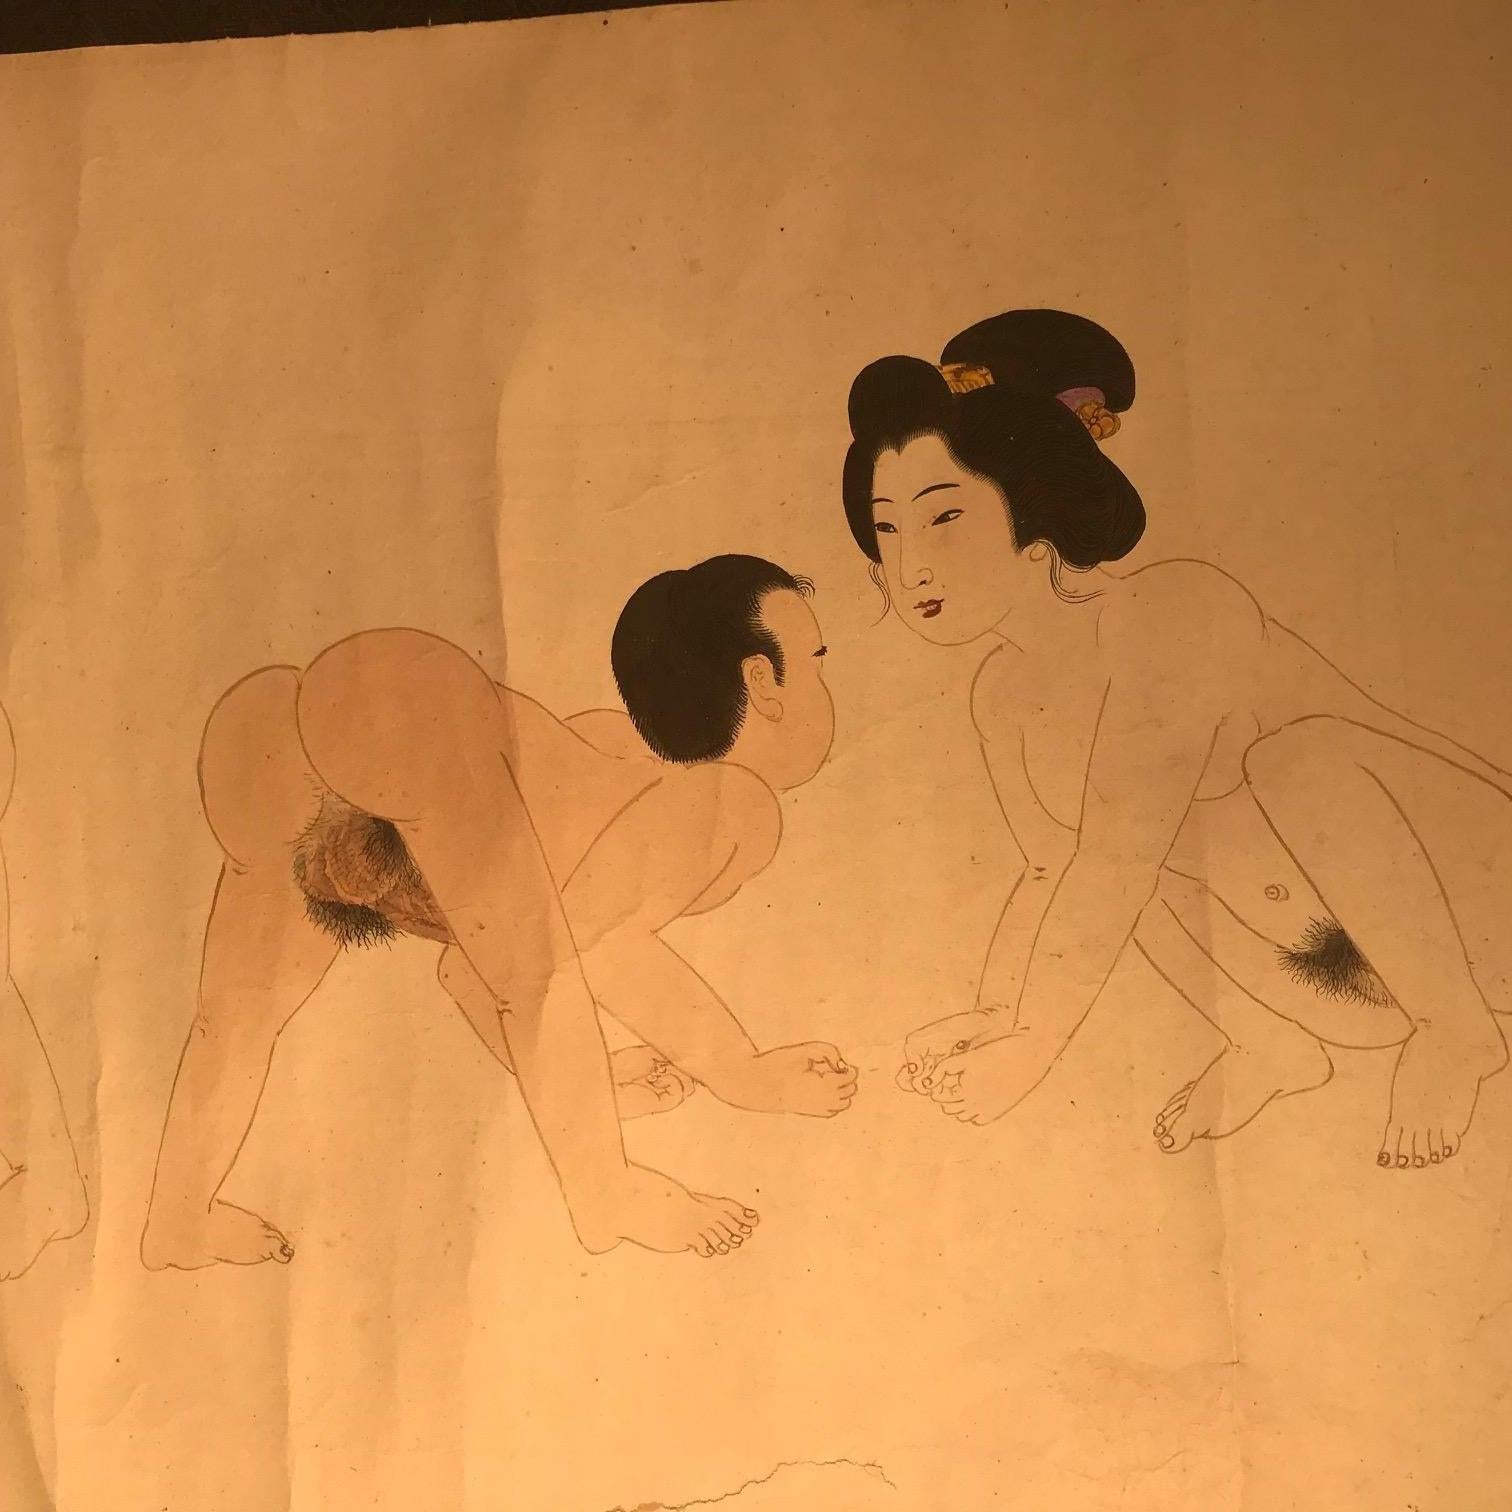 From our most recent Japanese Acquisitions Travels.

Here's a rare find.

This very fine authentic Japanese hand-painted Shunga erotic scene on silk hand scroll is an elusive one of a kind. According to reliable sources, this artist's works are